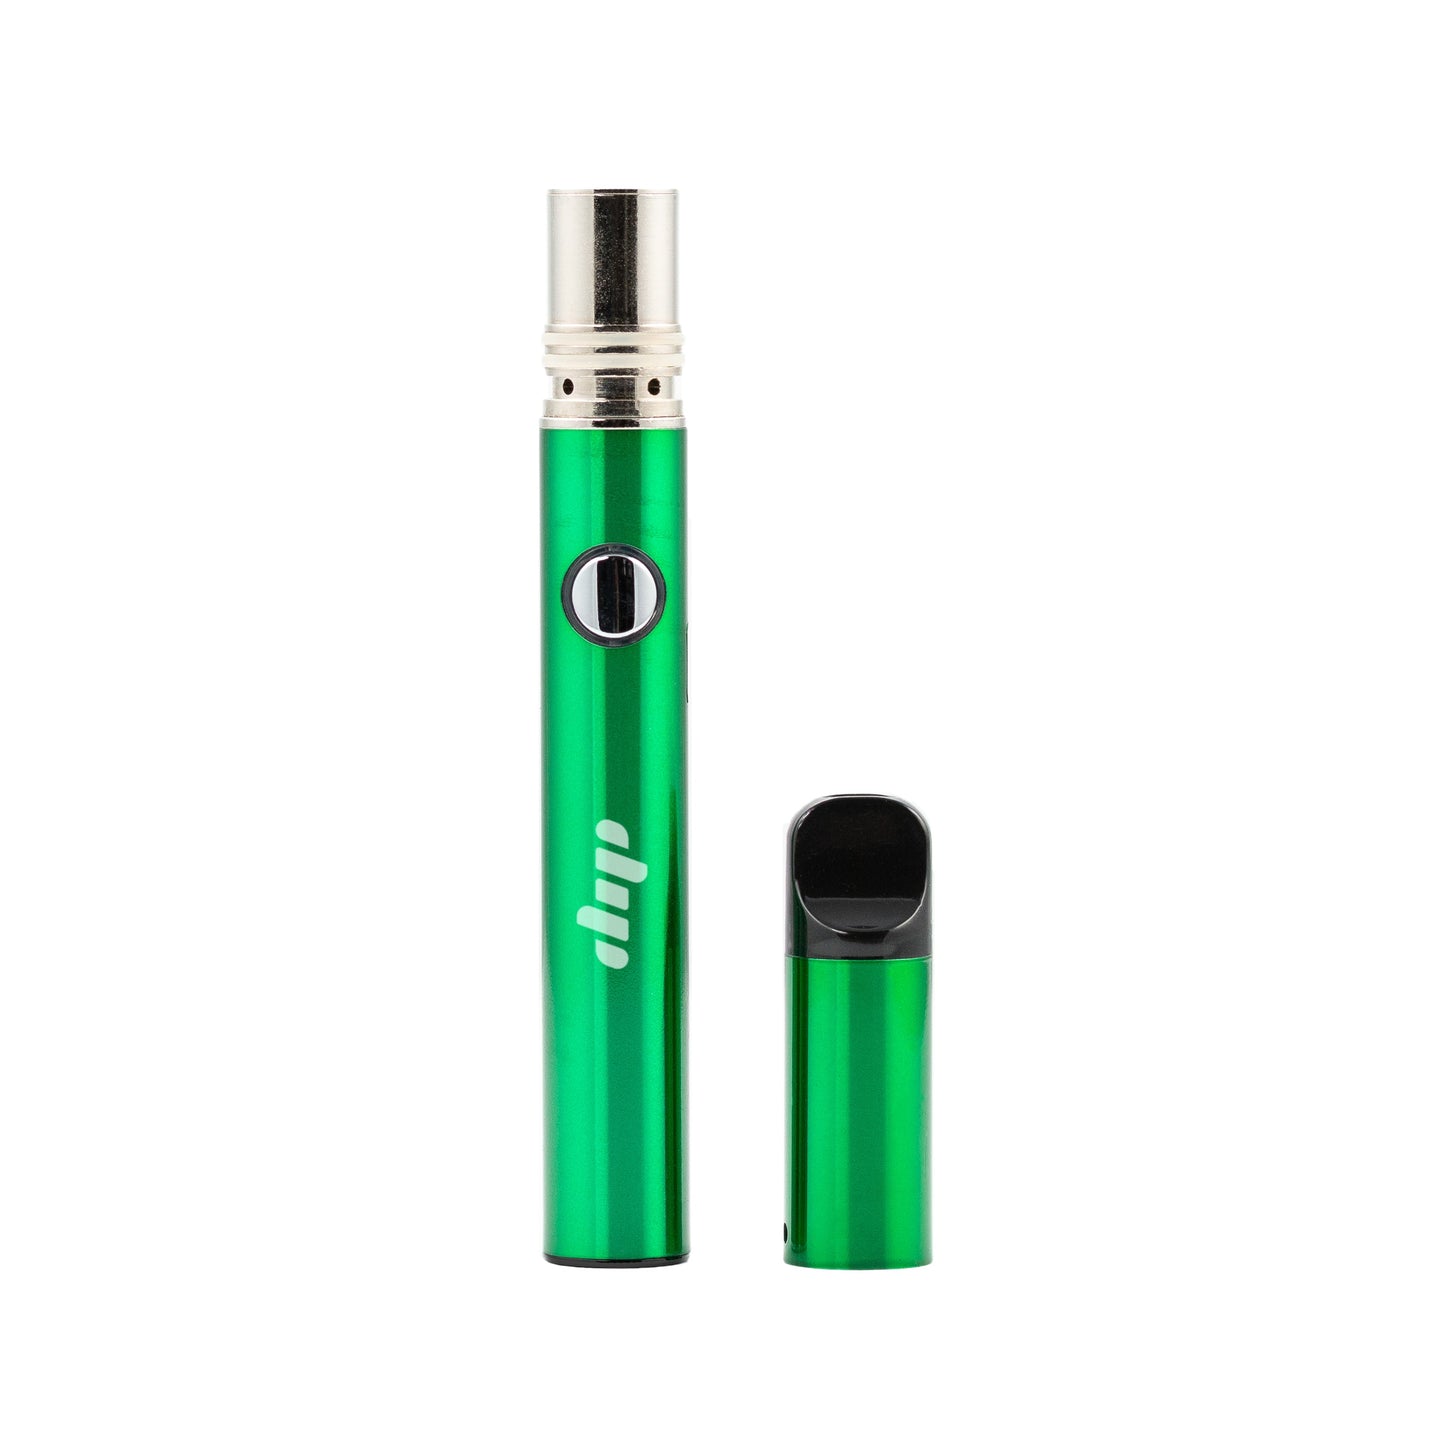 Lunar vape pen for cannabis concentrates in green with replacement reservoir. 